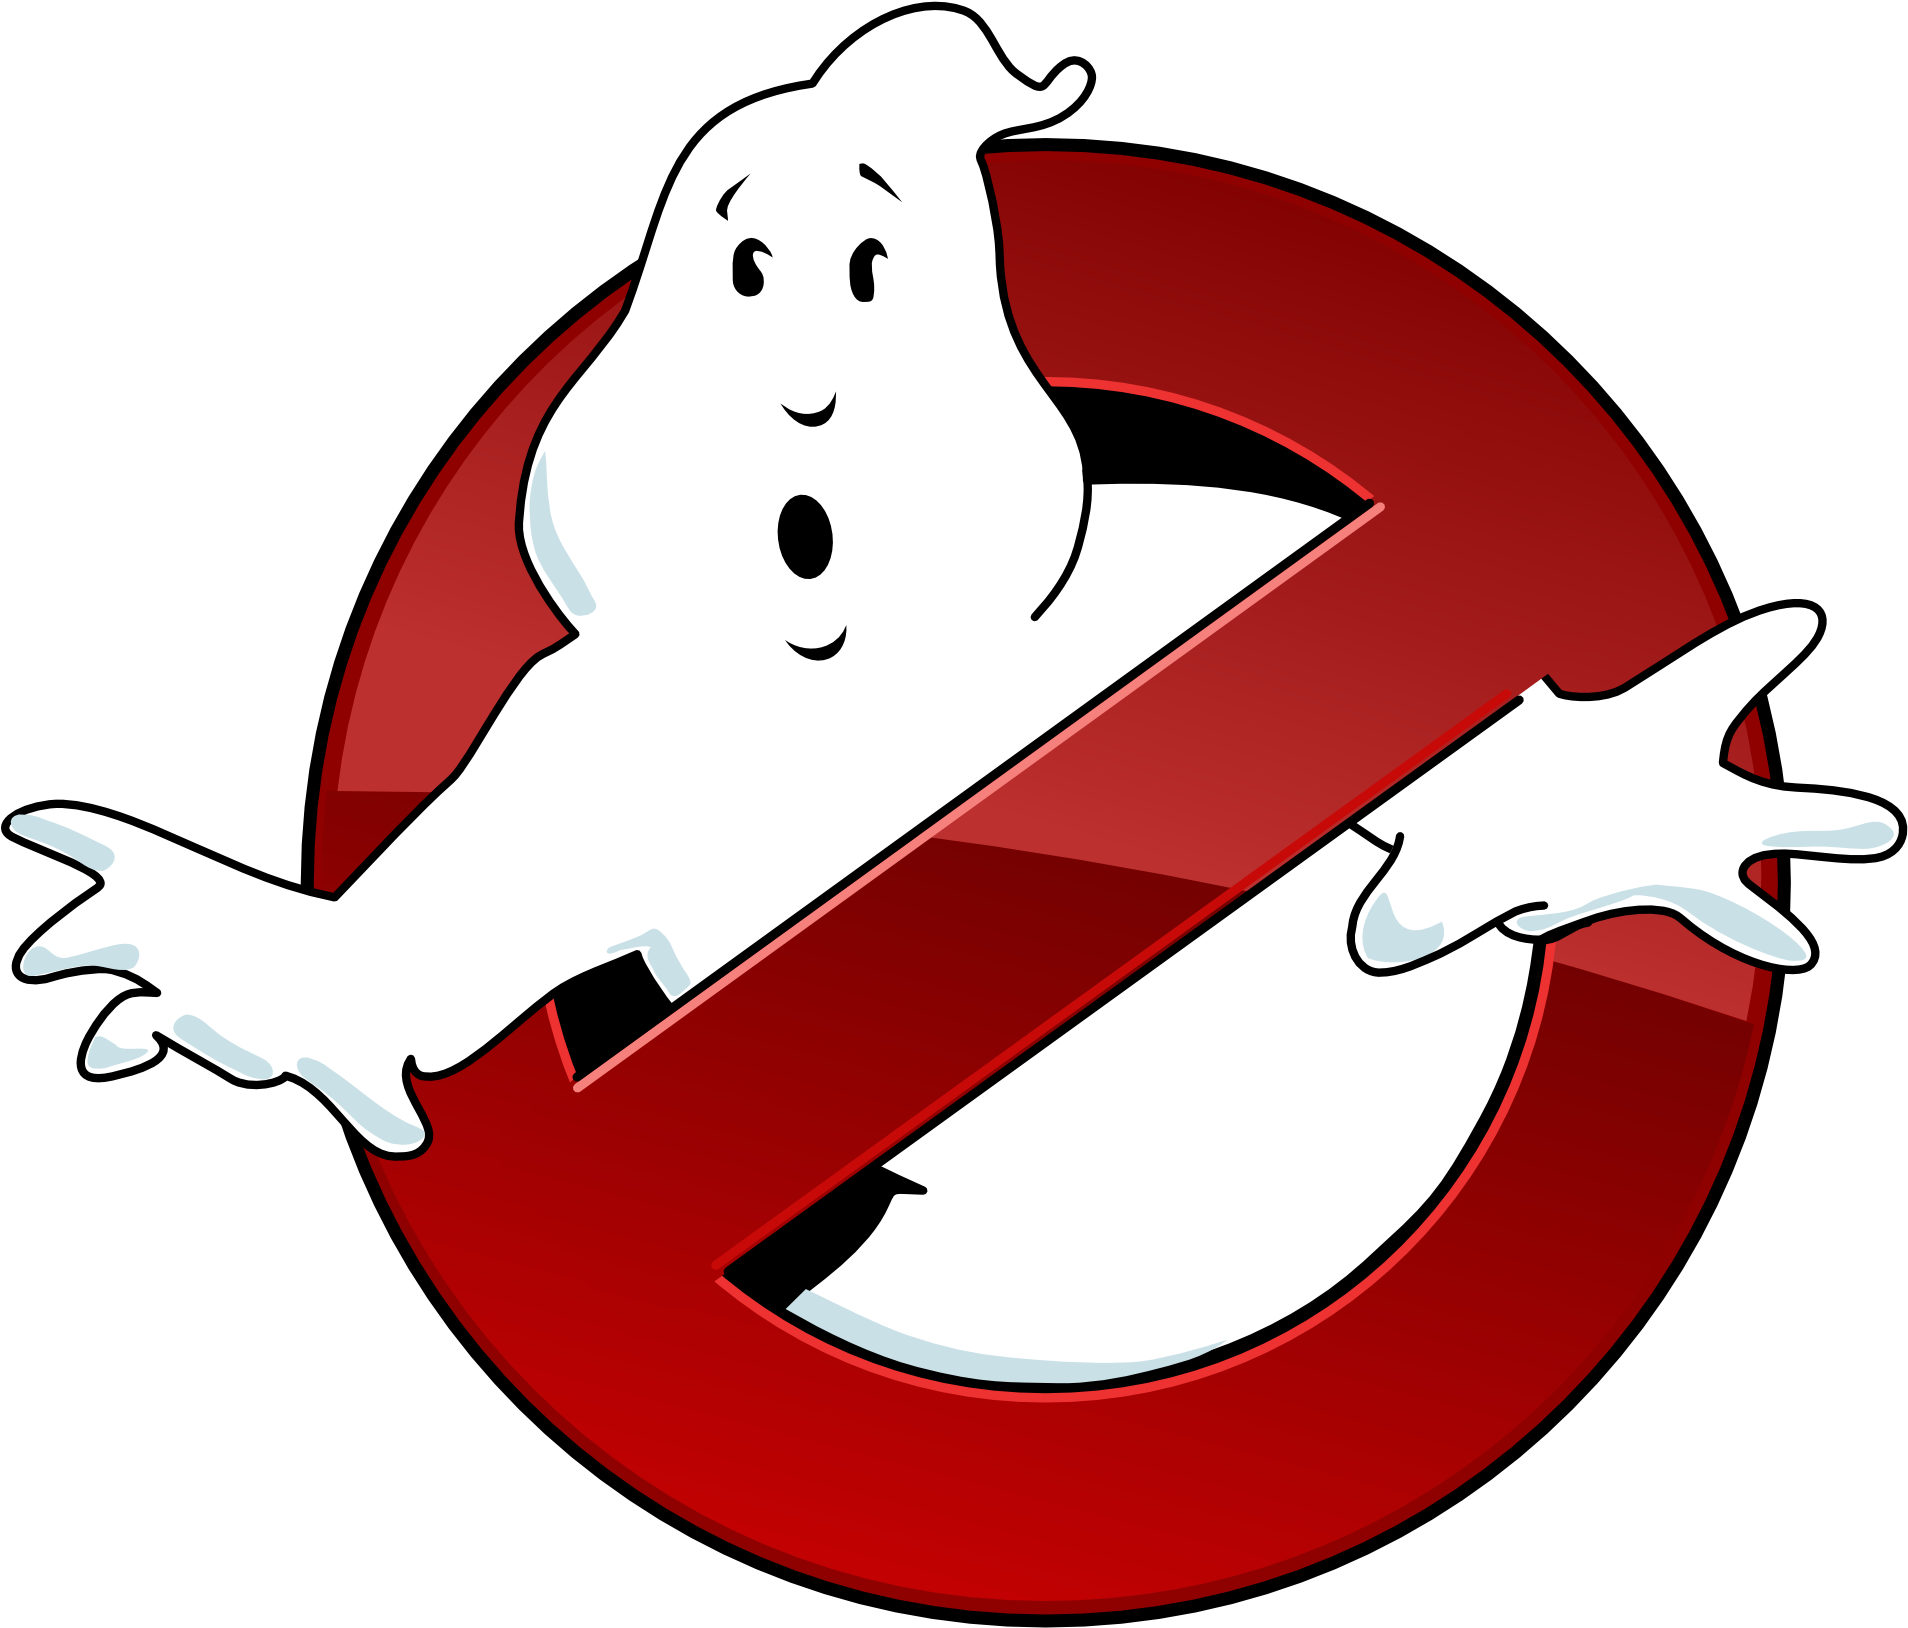 A Cartoon Ghost With A Red Circle